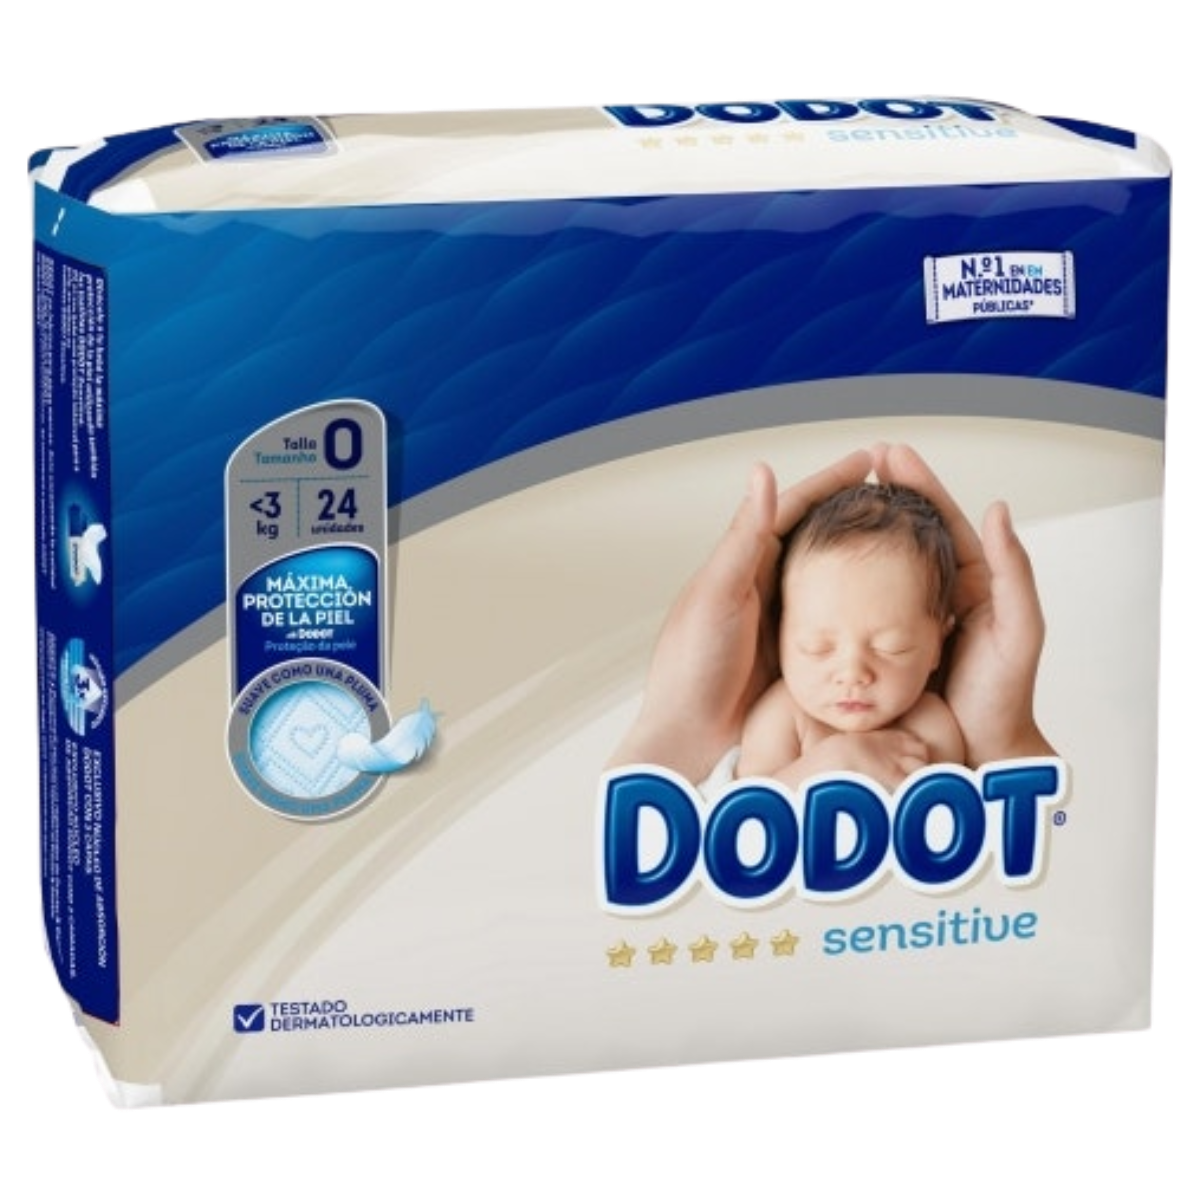 Dodot Splashers Nappies Size 3 12 pc - Wipes & Changing - Baby - Products -  Supermercado Apolónia